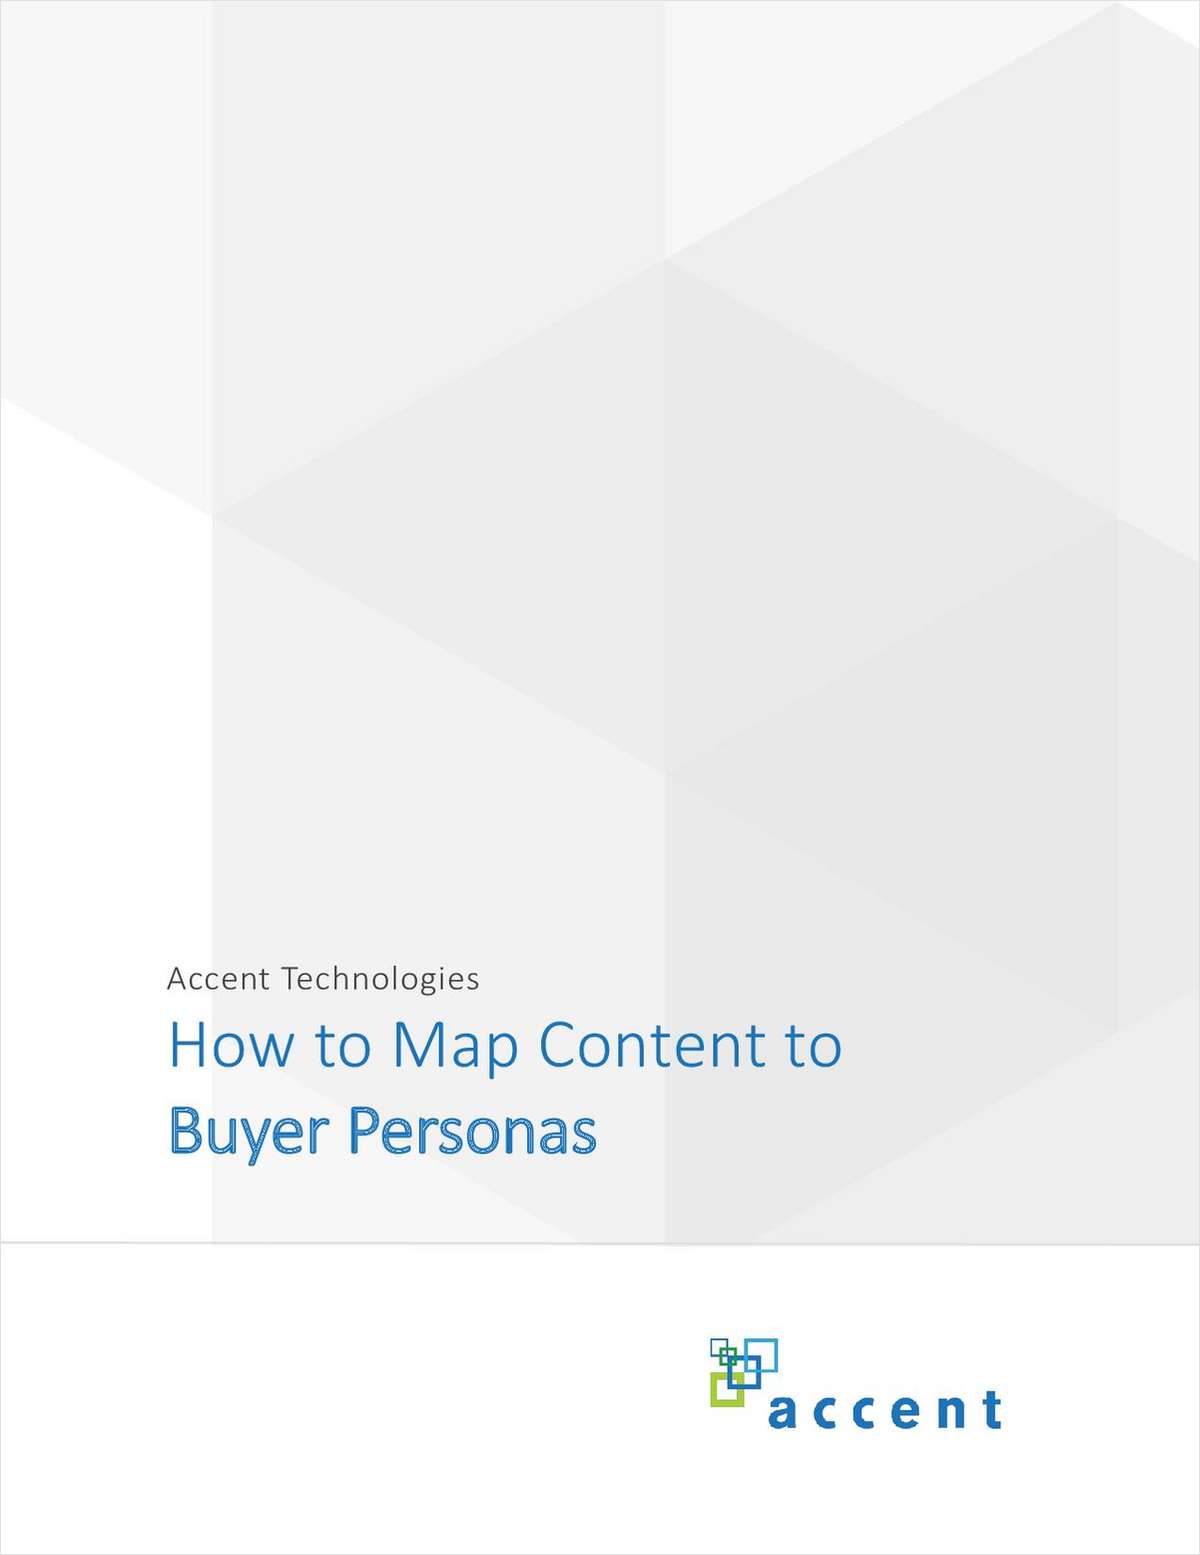 How to Map Content to Buyer Personas